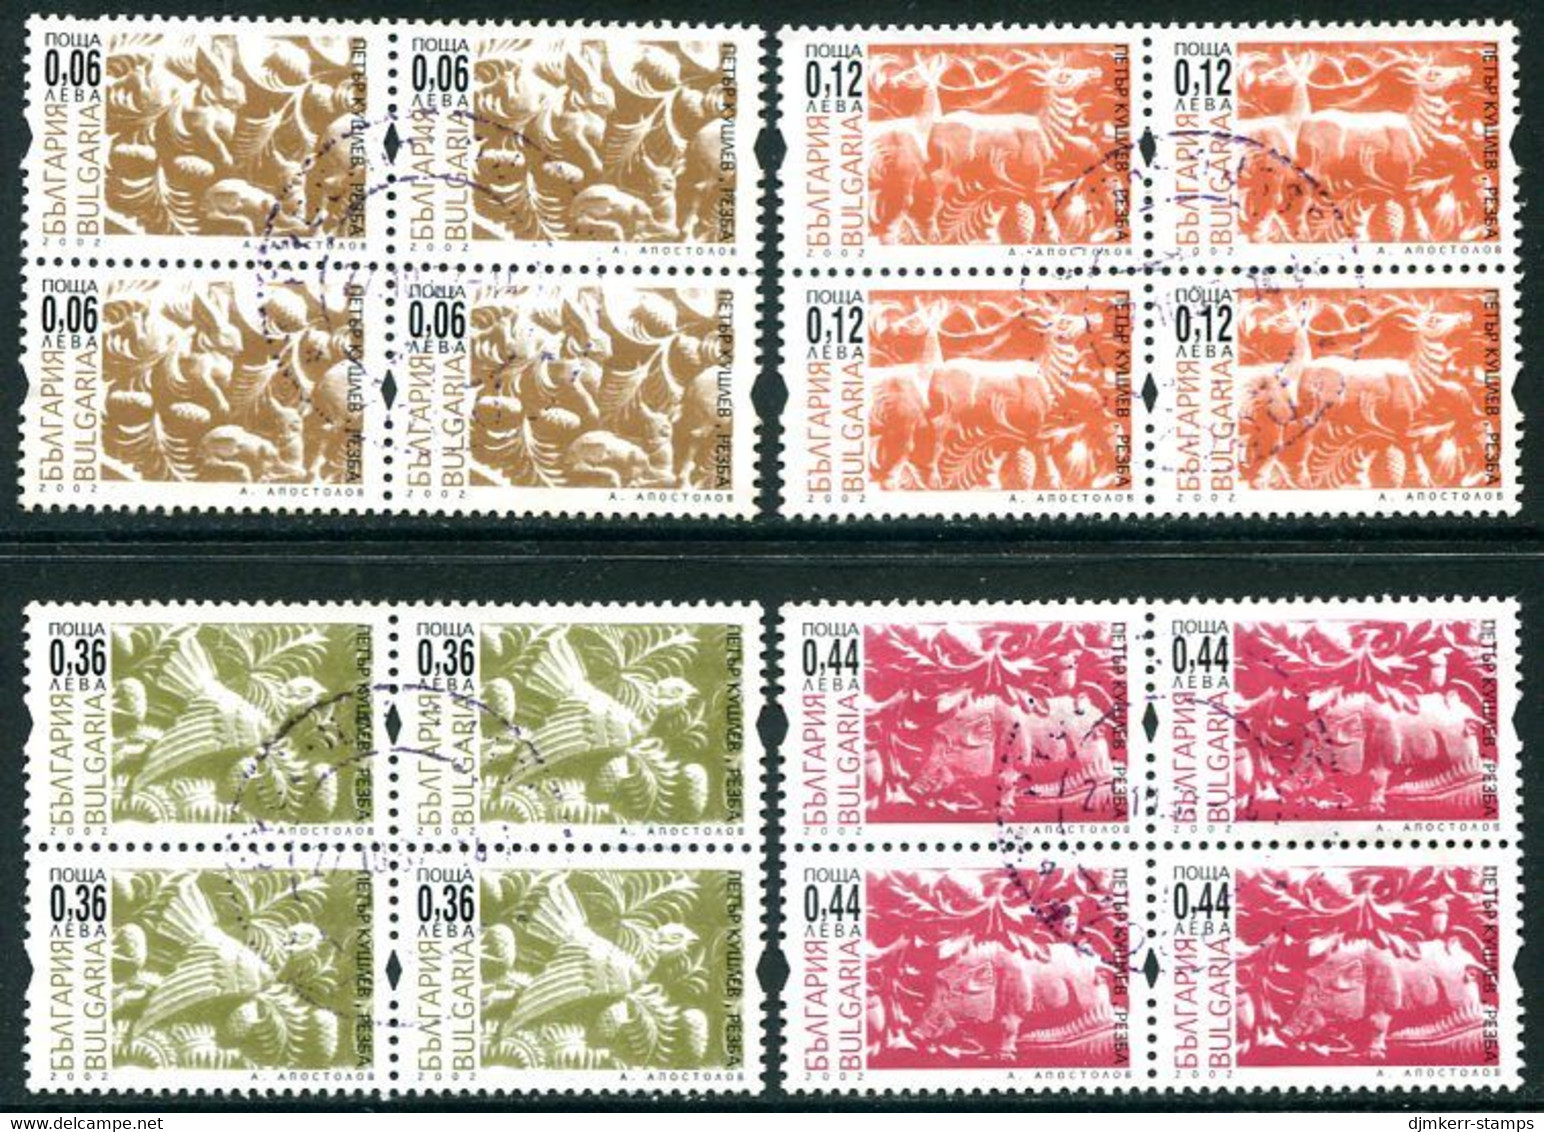 BULGARIA 2002 Kushlev Woodcuts With Security Perforation Used Blocks Of 4.  Michel 4571-74 CS X - Oblitérés